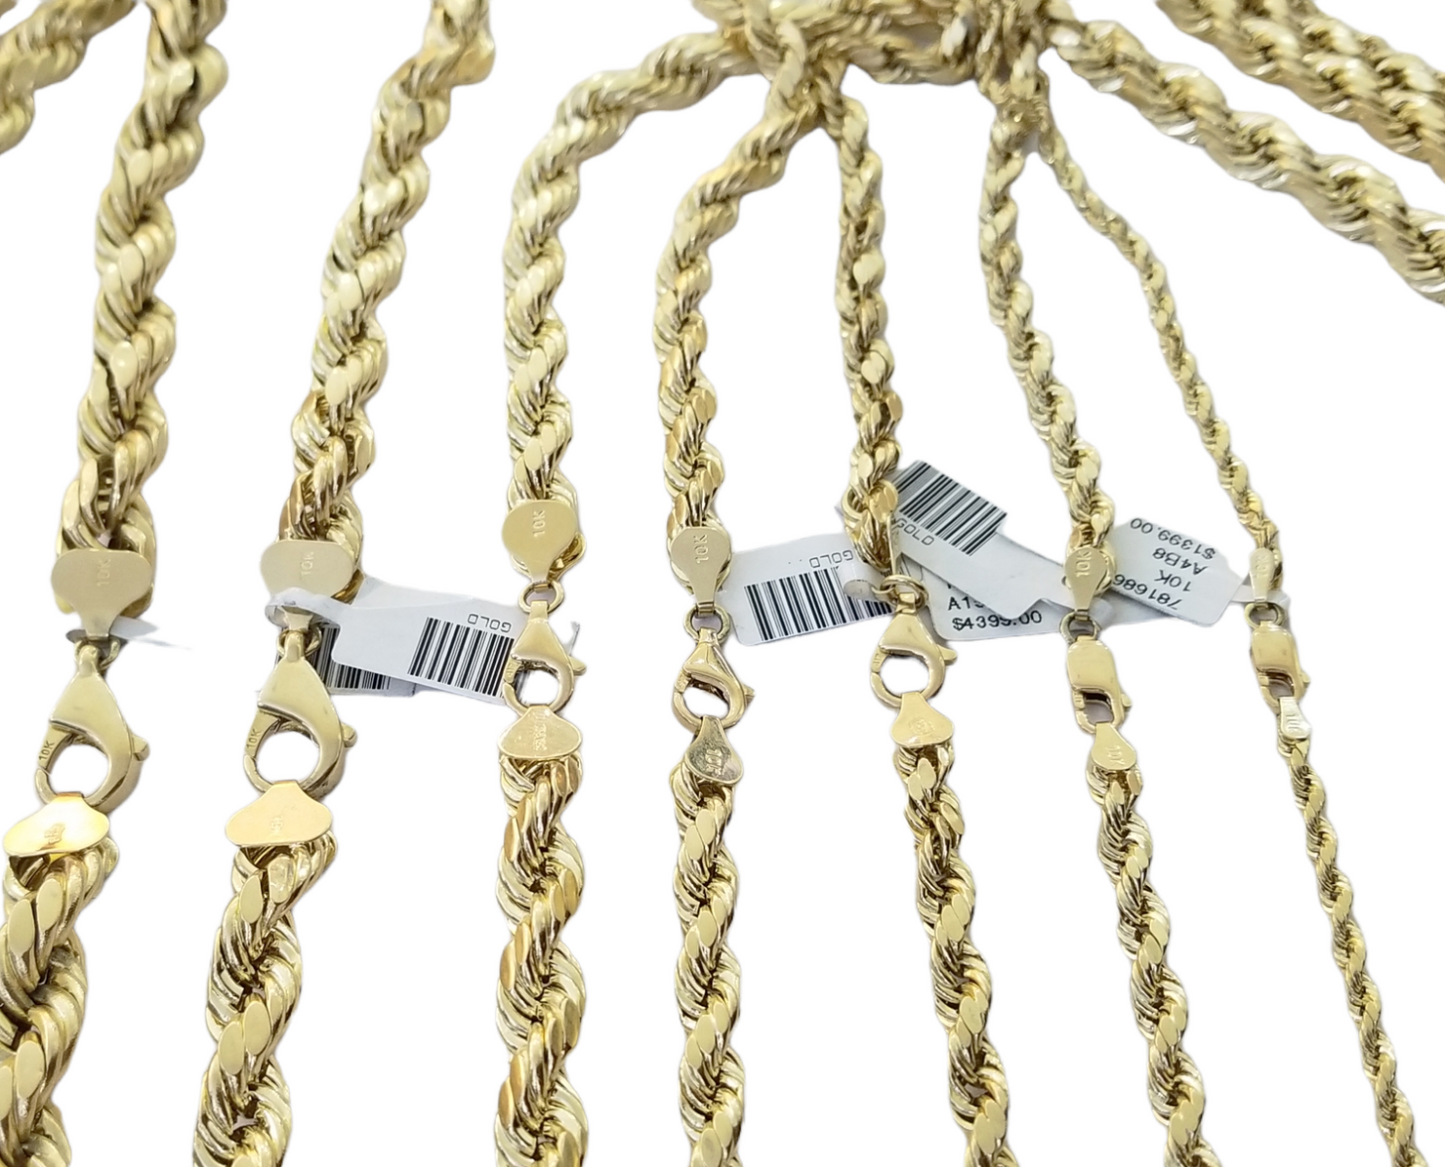 Real 10K Yellow Gold Rope Chain Necklace 26 Inch 3mm- 10mm Real 10k Men Women